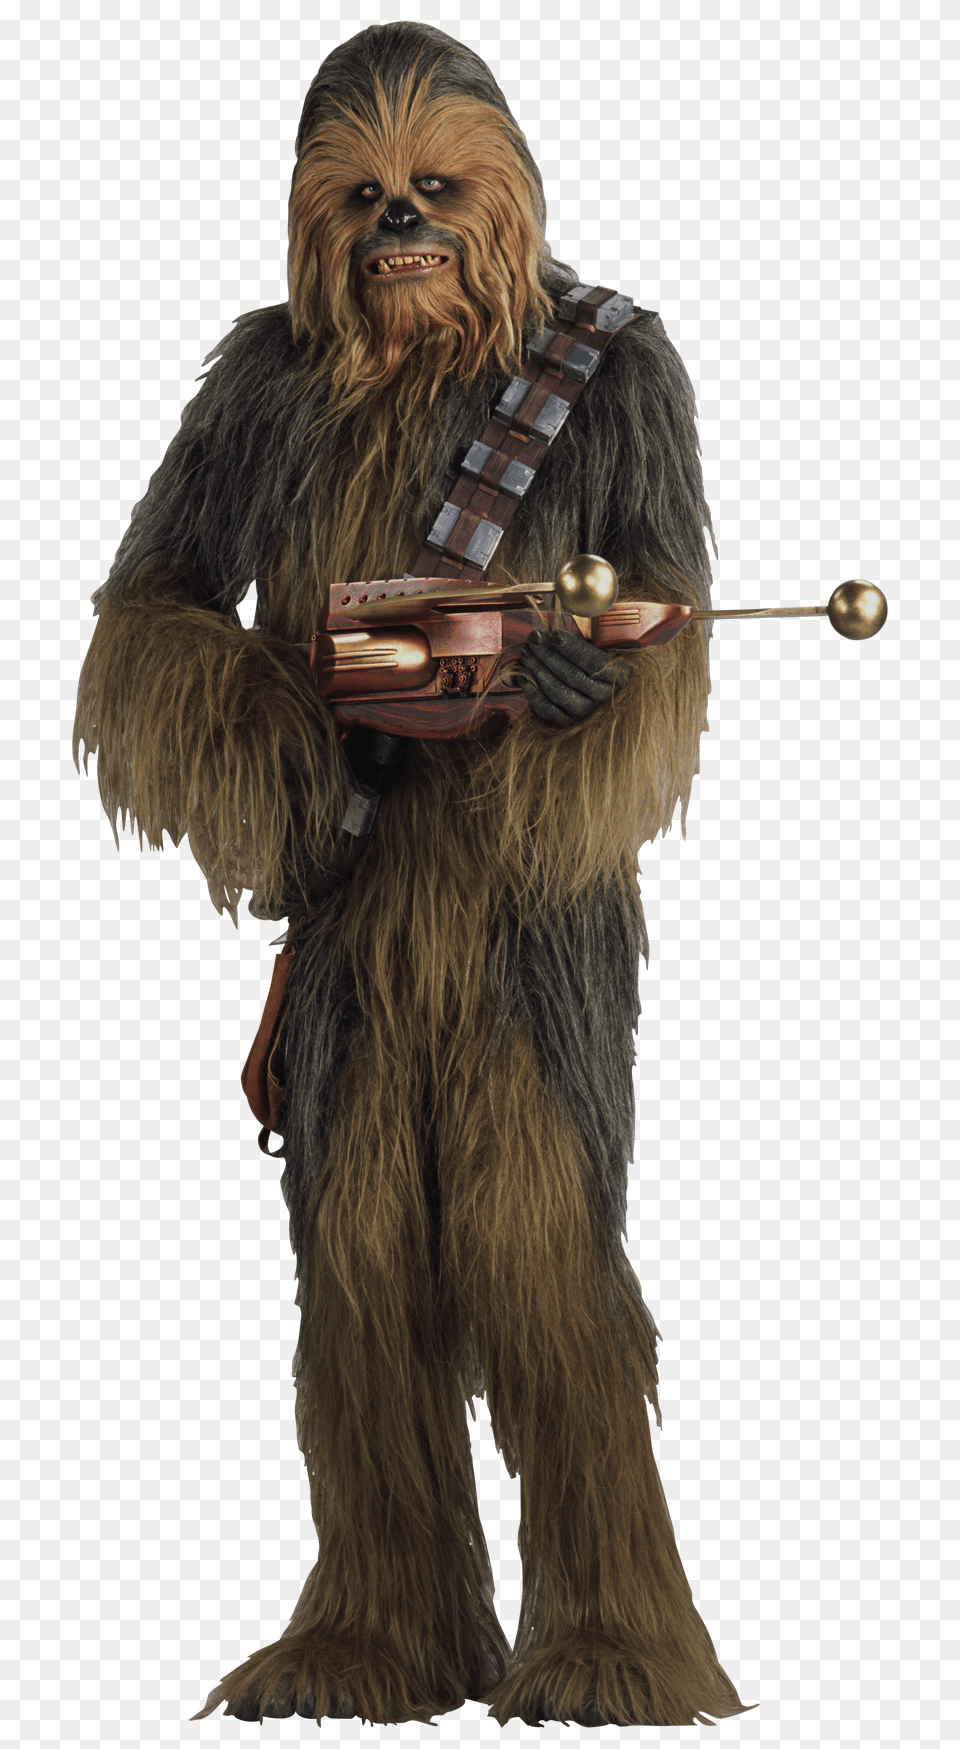 Download Star Wars File Hq Image Wookie From Star Wars Free Transparent Png